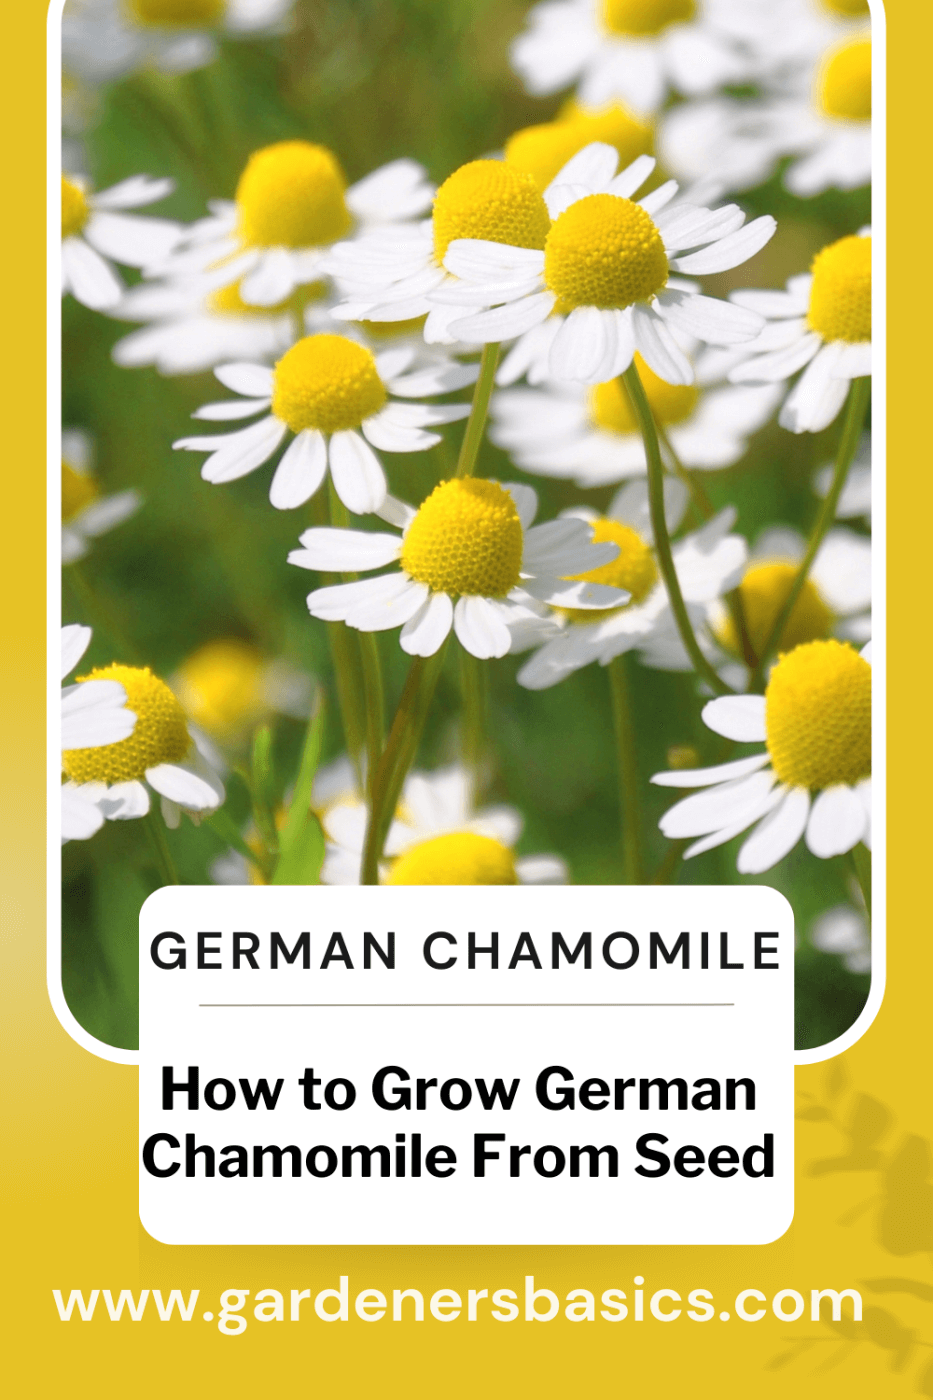 How to grow german chamomile from seed